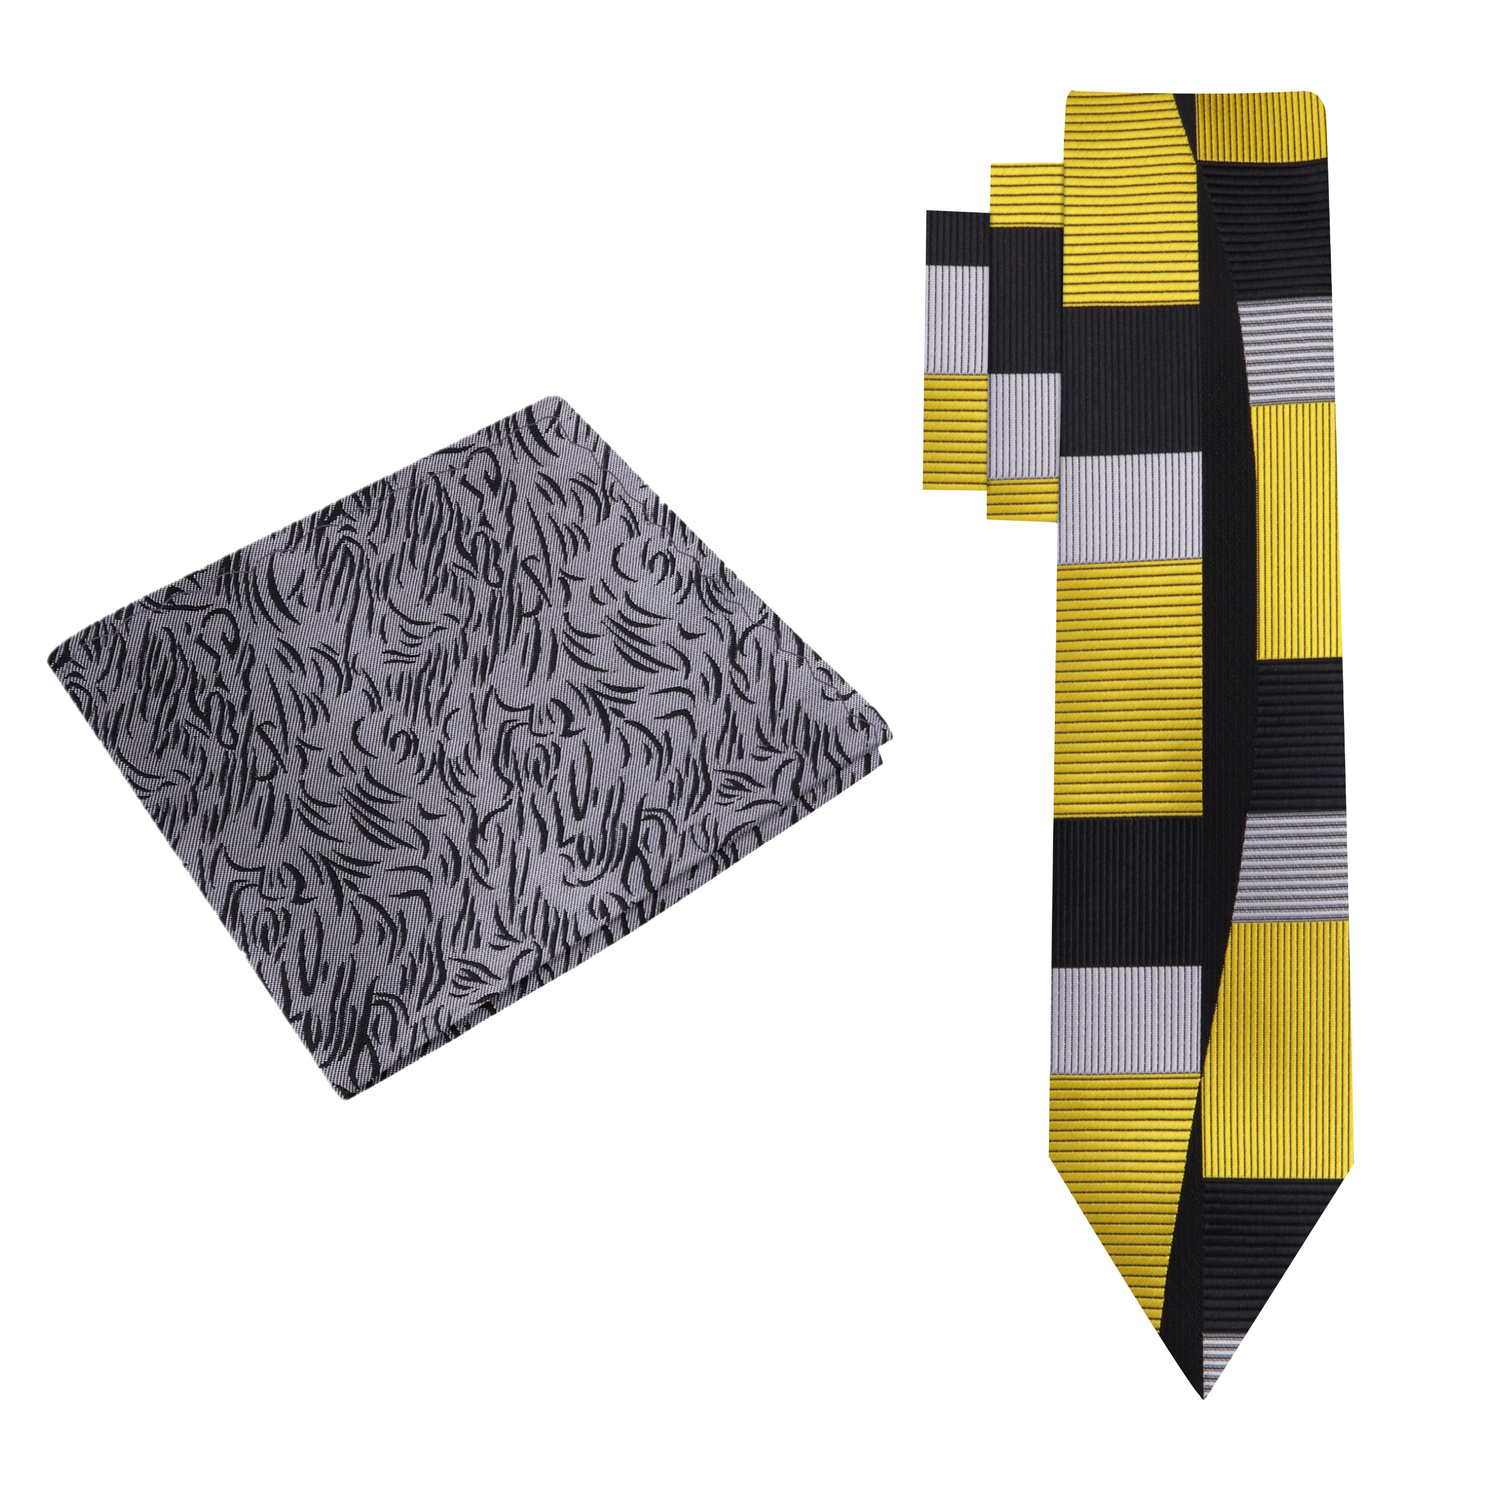 View 2: Gold, Black, Grey Abstract Thin Tie and Grey Abstract Pocket Square